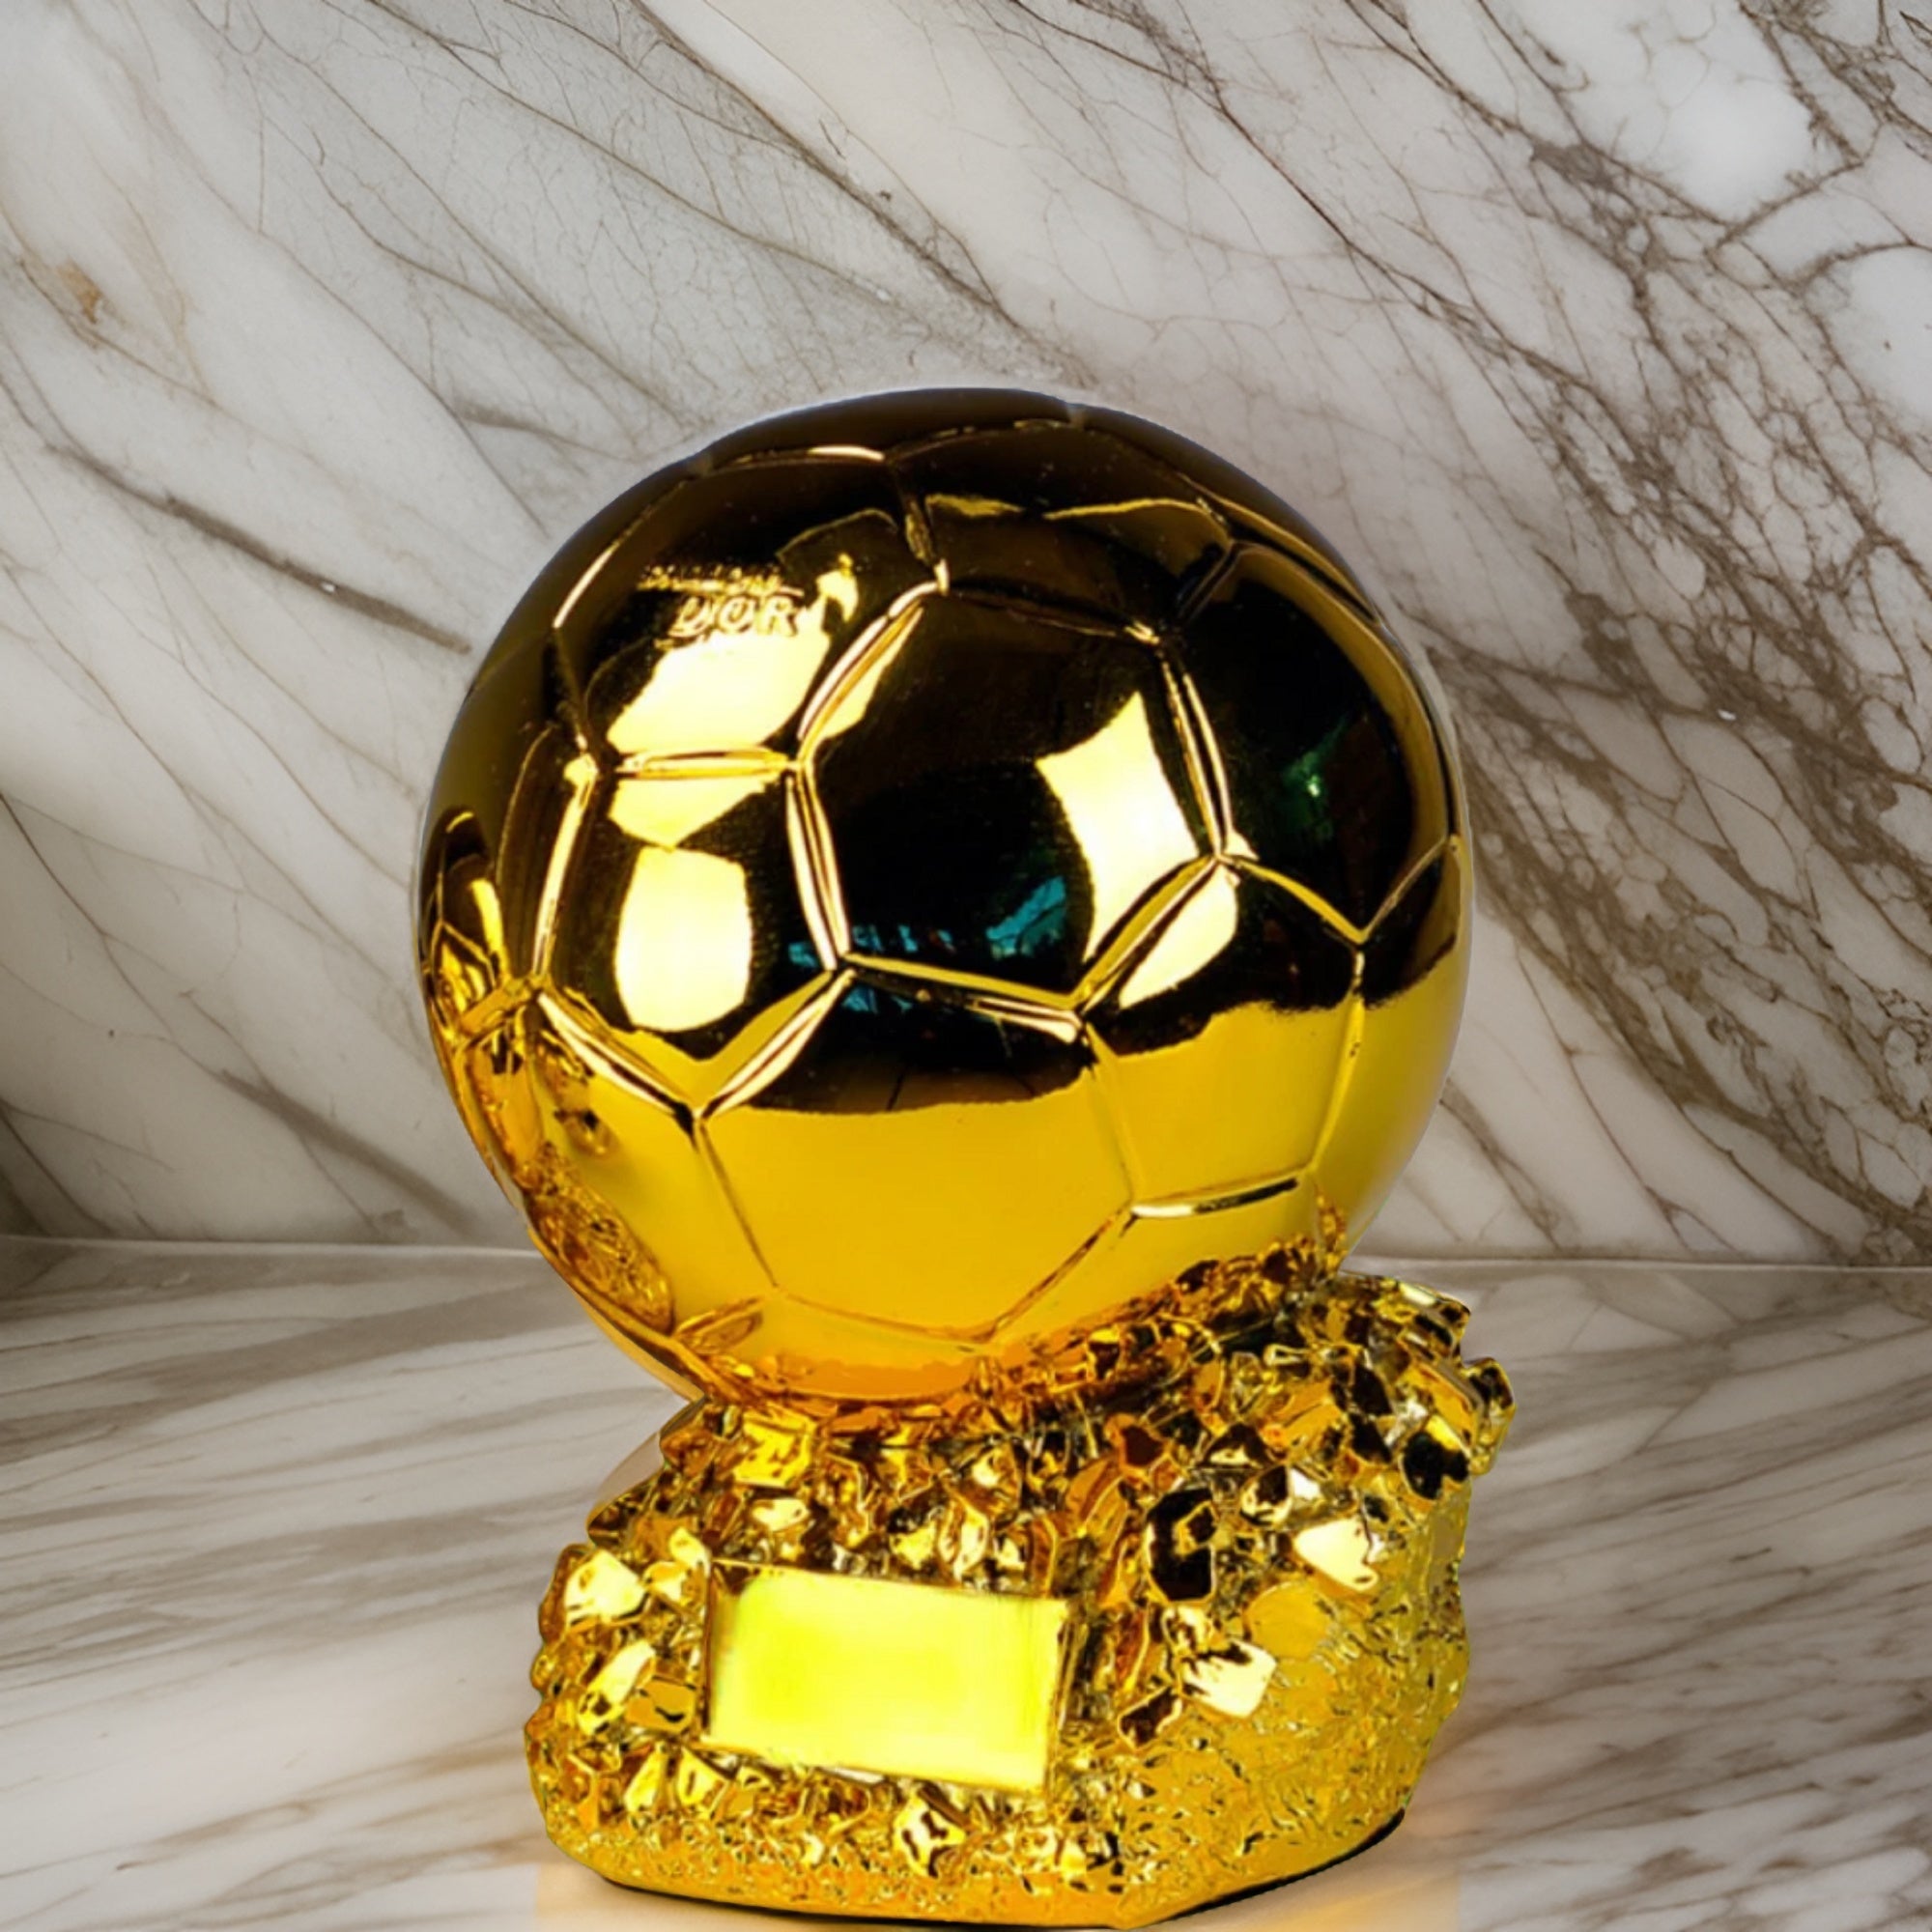 Golden Ballon Football Excellent Player Award Competition Honor Reward Spherical Trophy Customizable Gift for Childen Adult